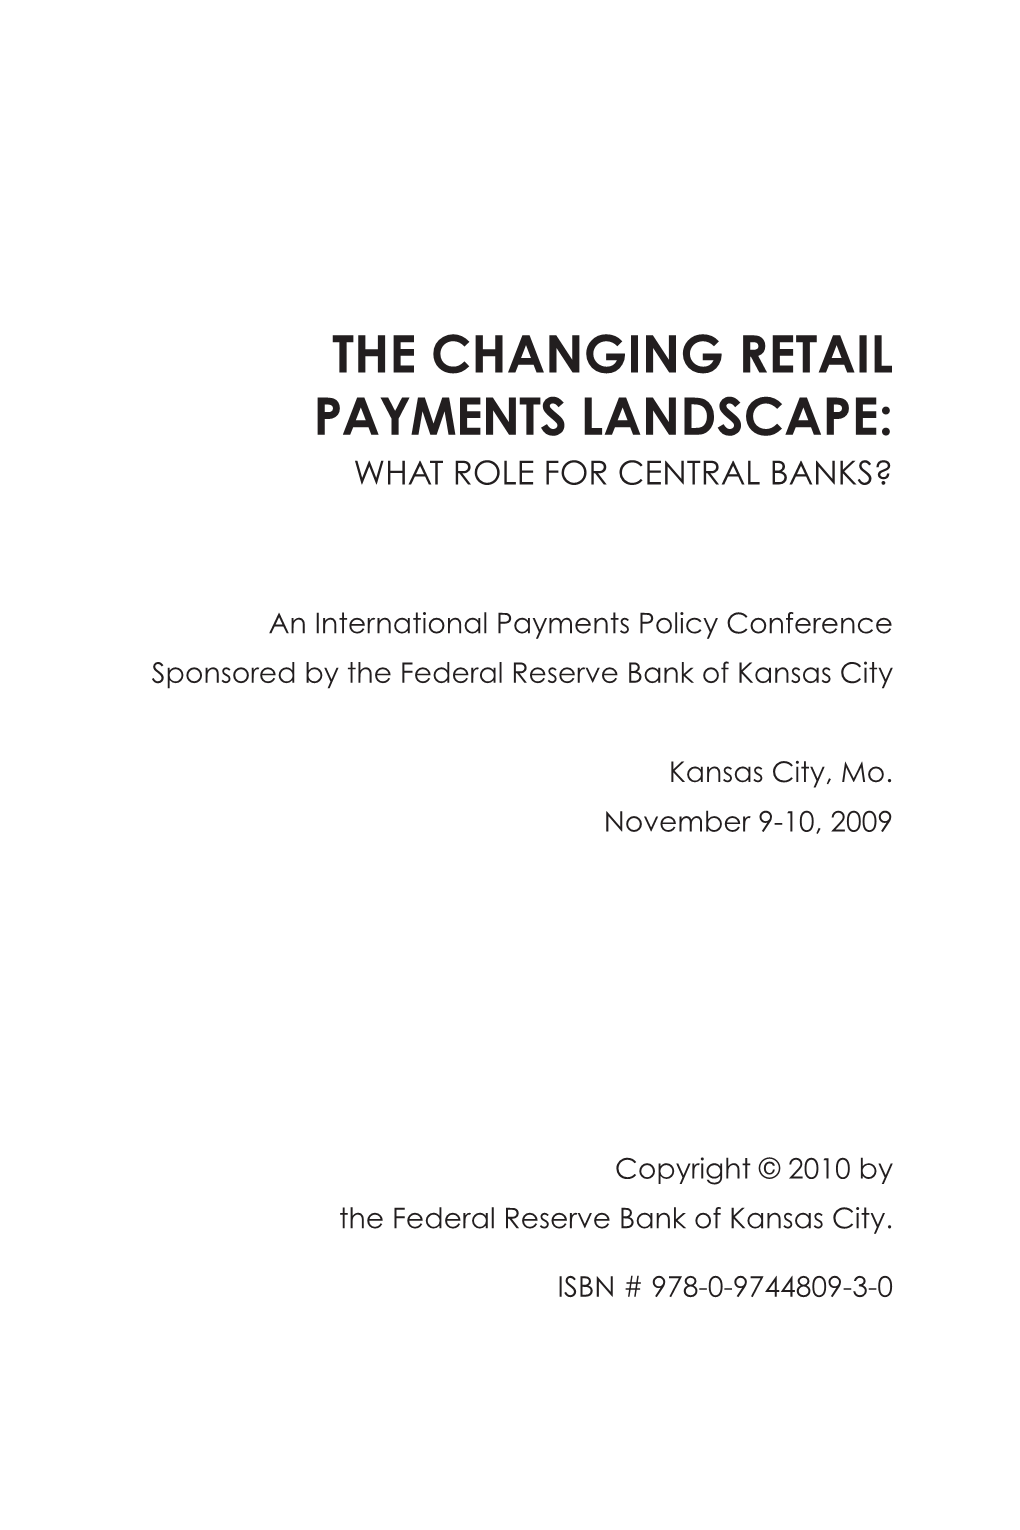 The Changing Retail Payments Landscape: What Role for Central Banks?